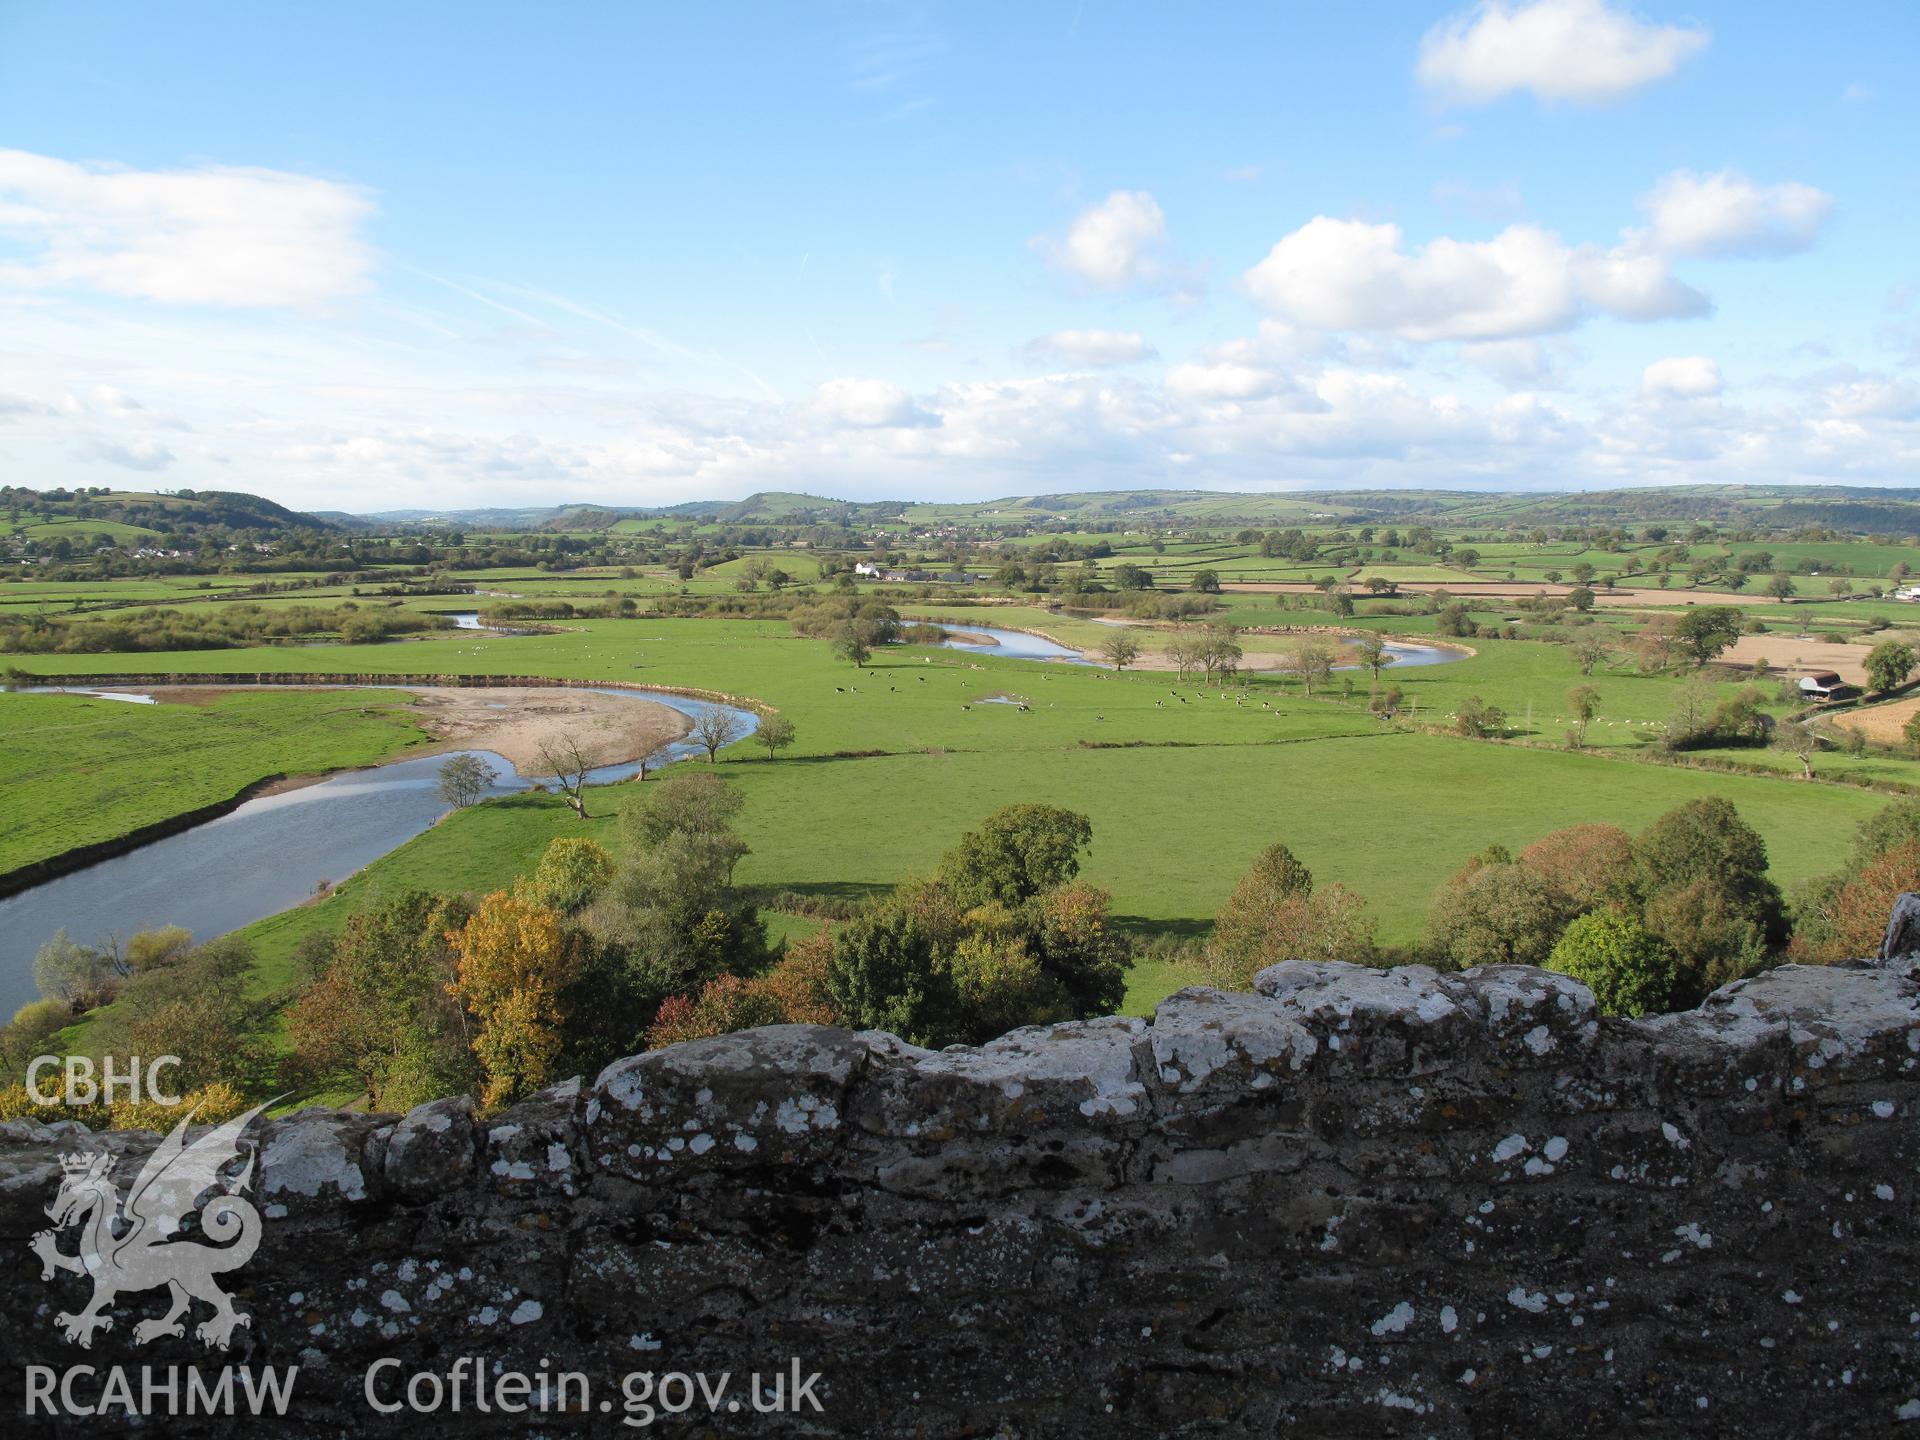 Towy Valley from Dryslwyn Castle, looking west, taken by Brian Malaws on 20 October 2010.